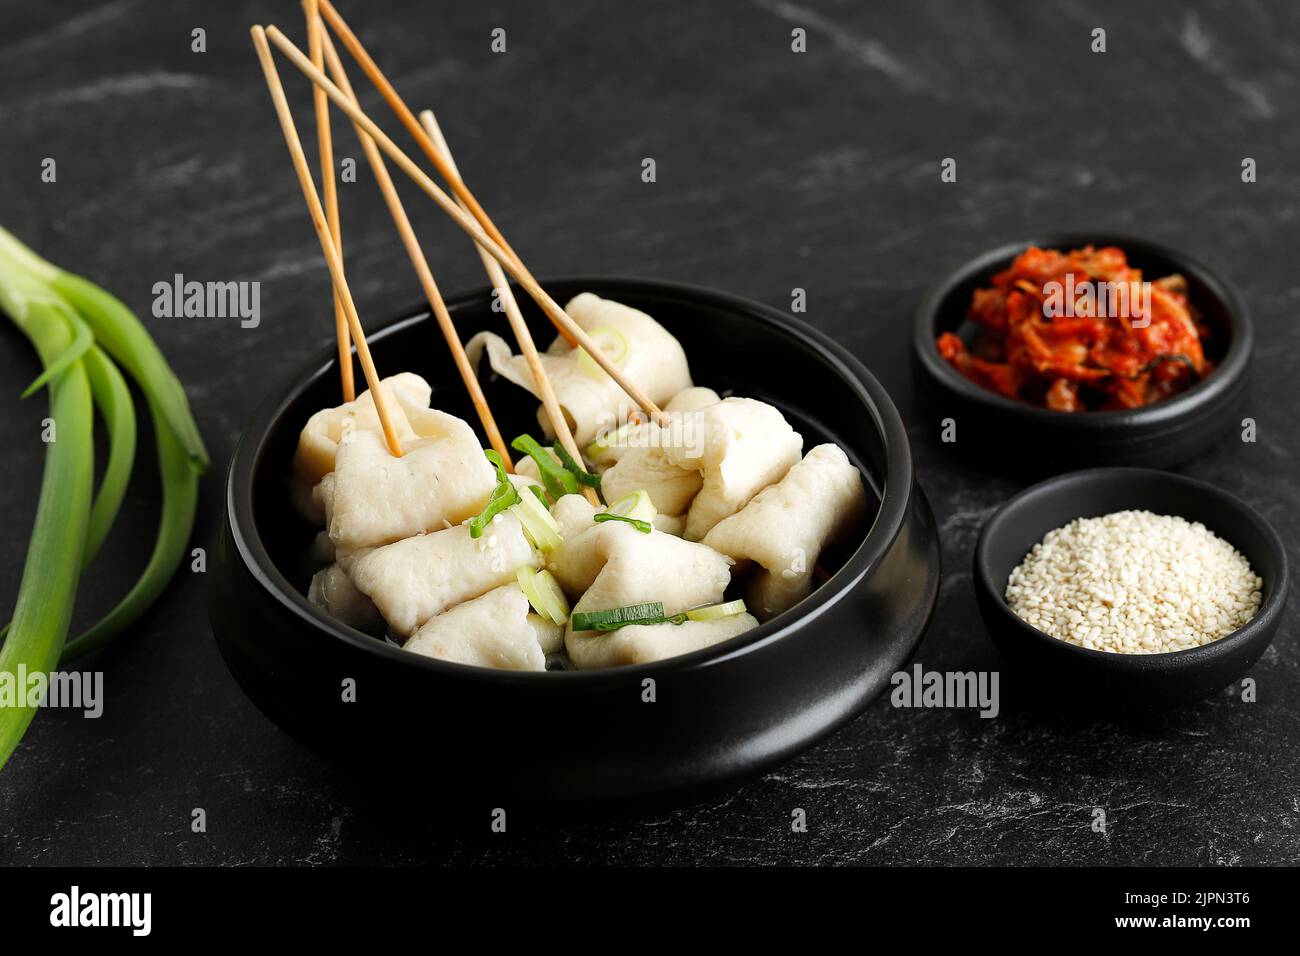 Korean Odeng Tangeomuk Odeng Guk, Korean Fish Cake Soup in Traditional Pot on Black Table Background. Served with Kimchi Stock Photo